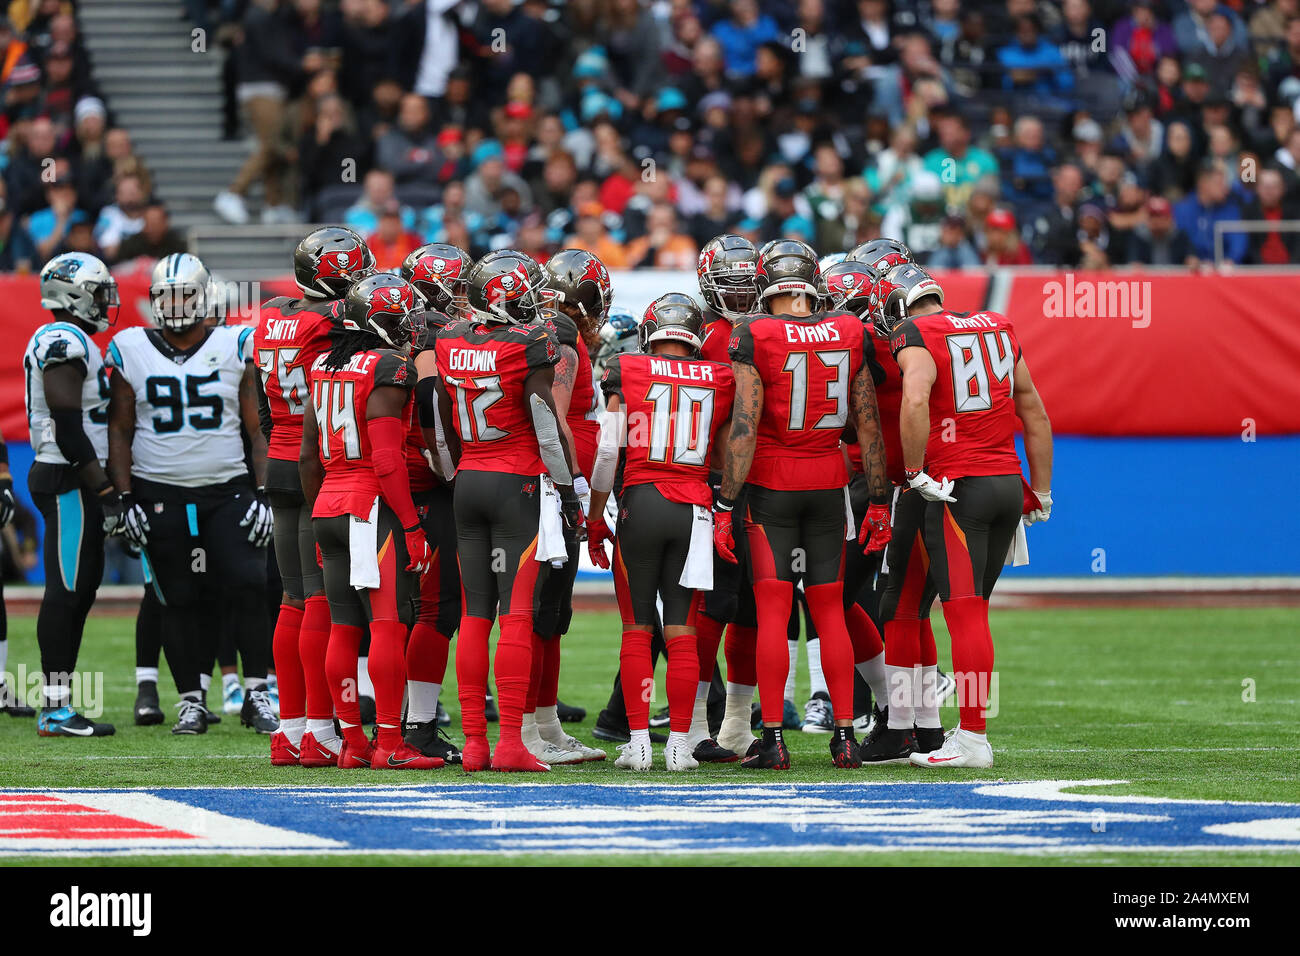 LONDON, ENGLAND - OCTOBER 13 2019: The NFL game between Carolina Panthers and Tampa Bay Buccaneers at Tottenham Stadium in London, United Kingdom. Stock Photo